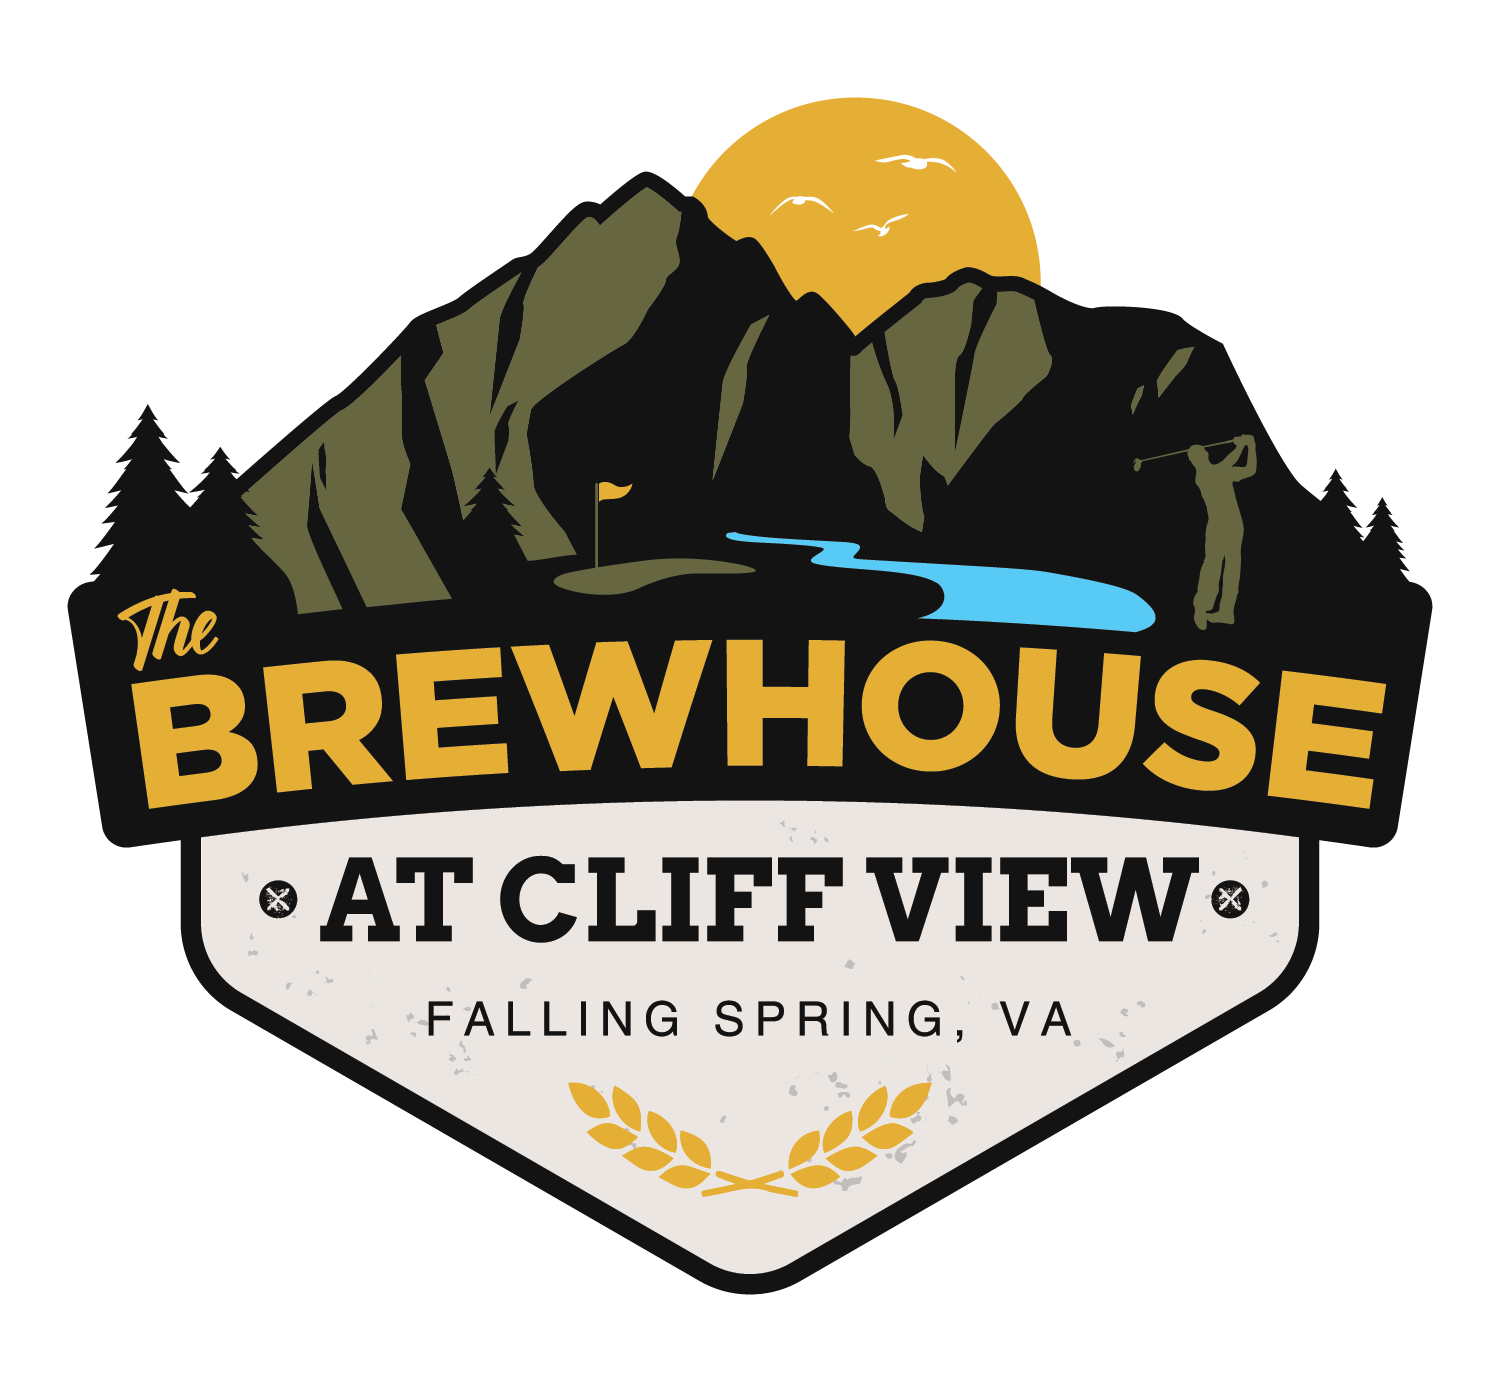 The Brewhouse at Cliff View Falling Spring, VA